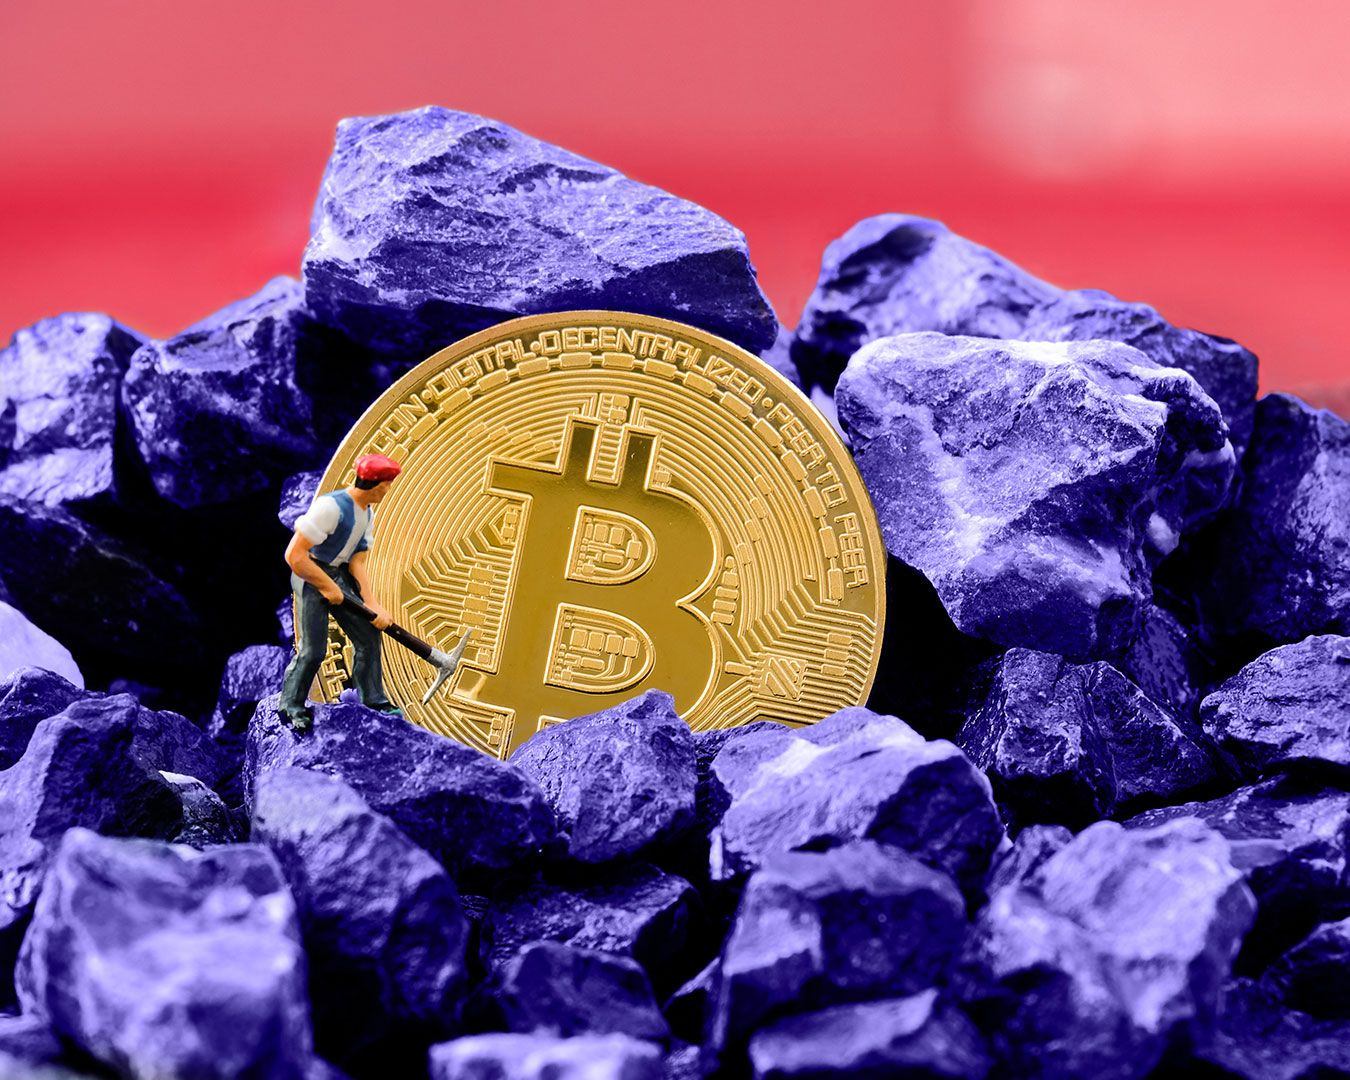 What Will Happen After The Last Bitcoin Is Mined?